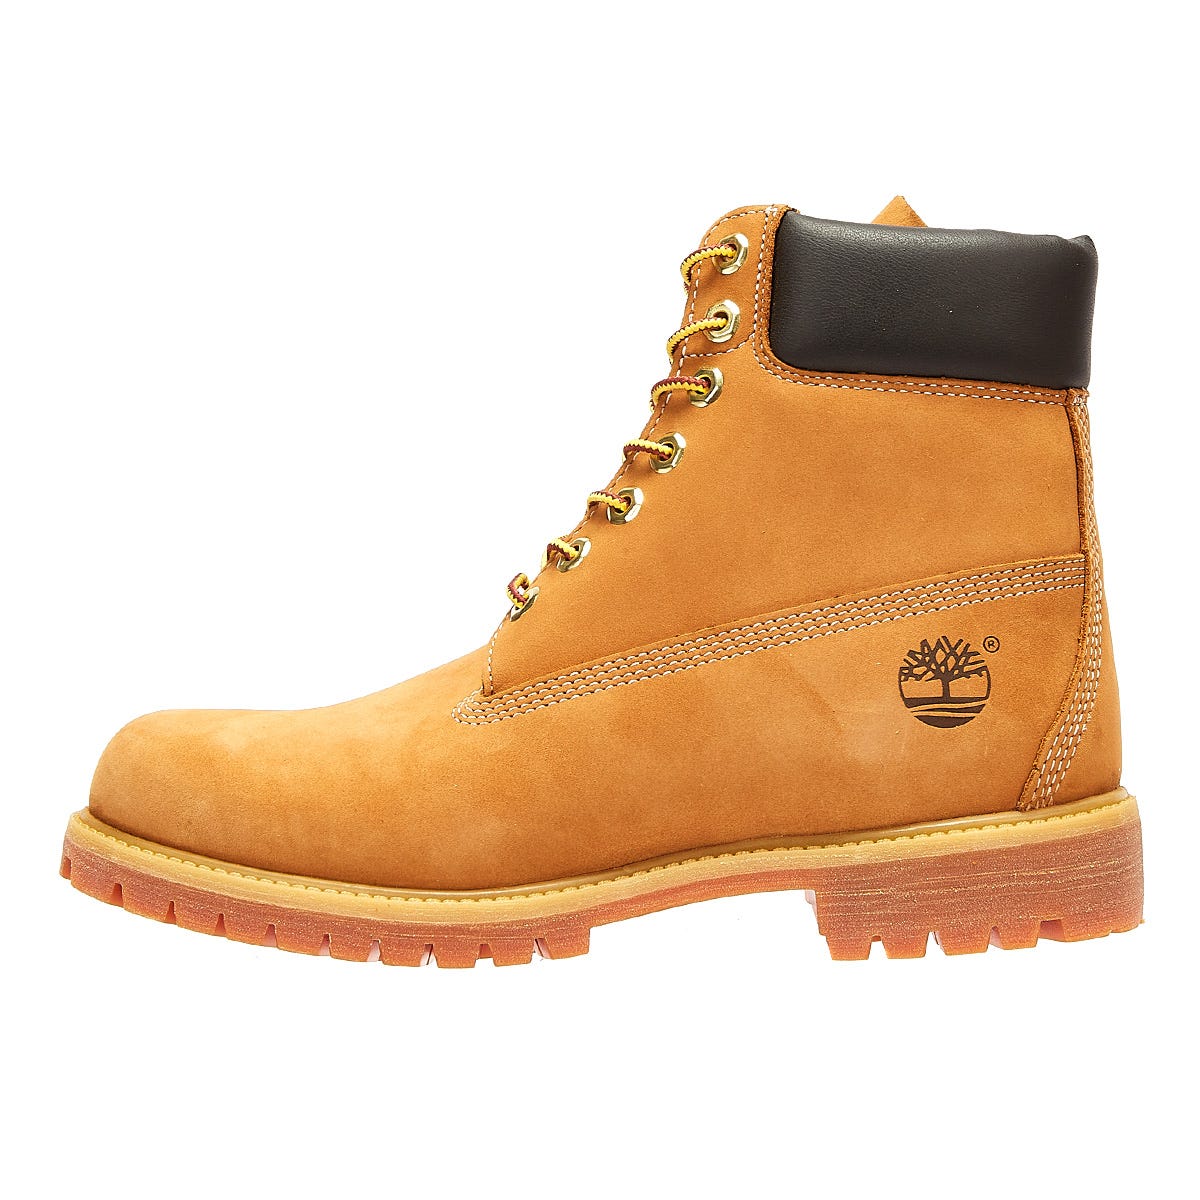 Timberland Mens Wheat Premium Classic 6 inch Nubuck Leather Ankle